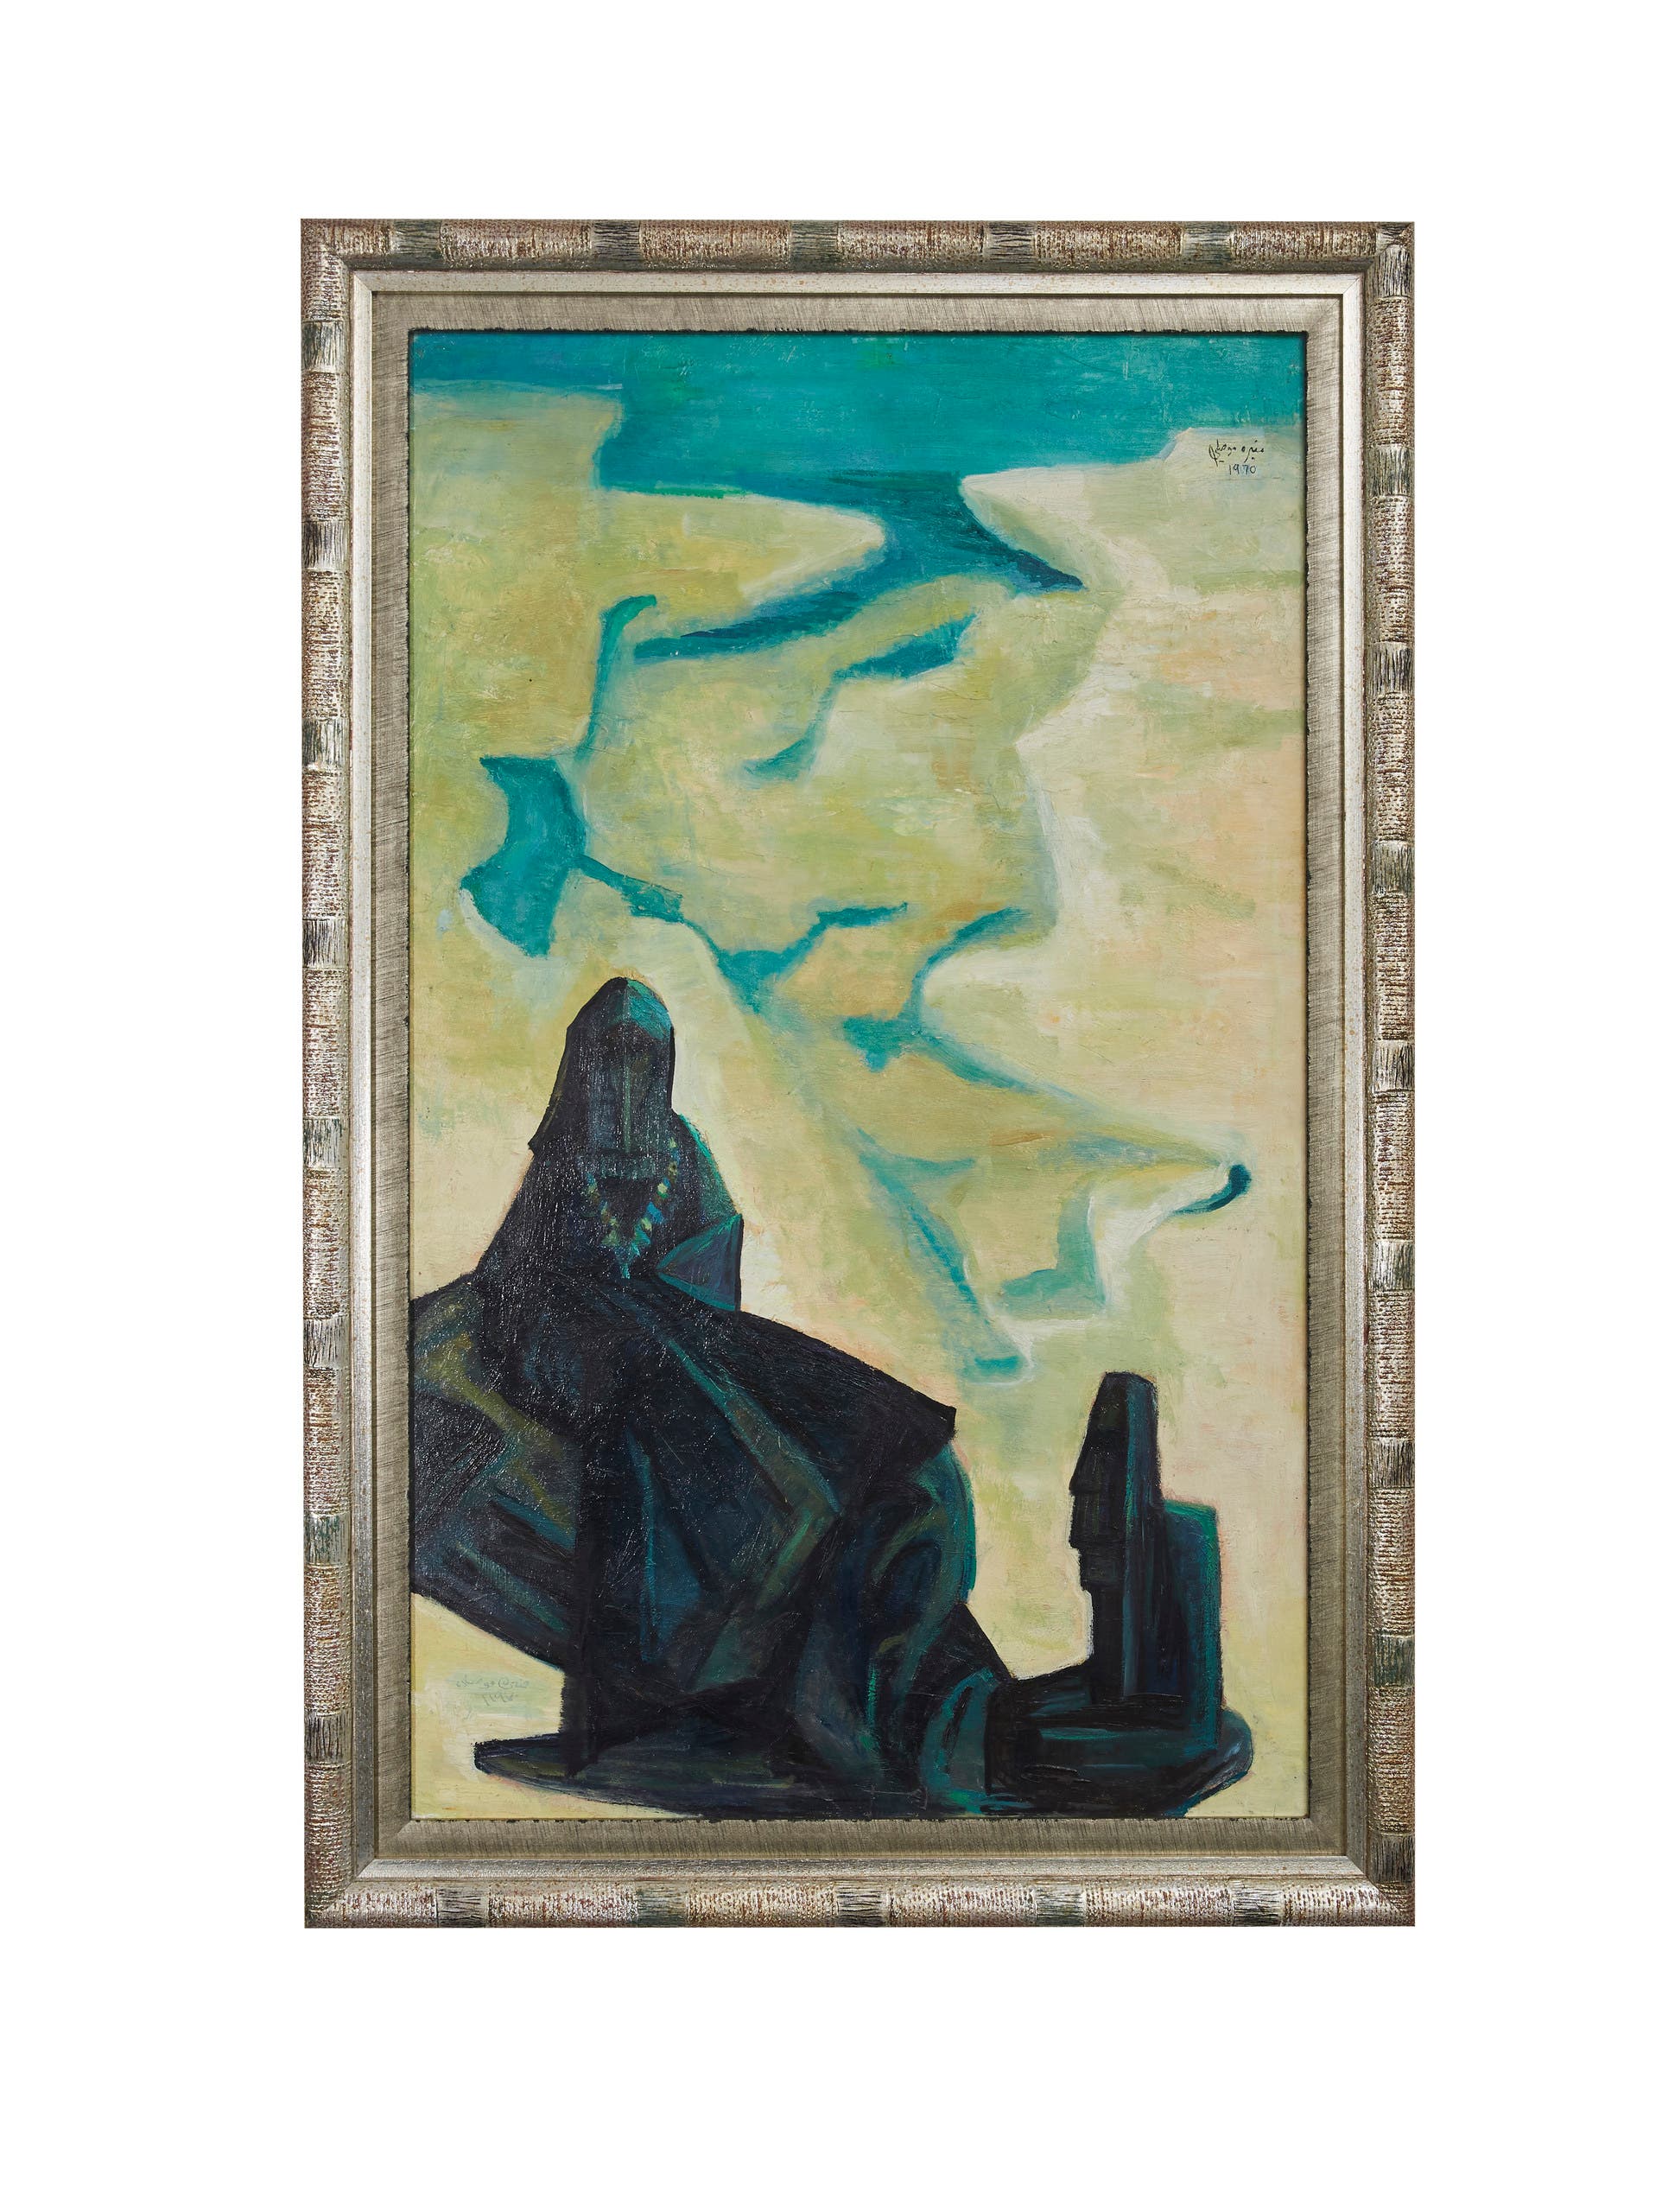 The Land of Solidities, 1970, Oil on wood, 110 x 80 cm